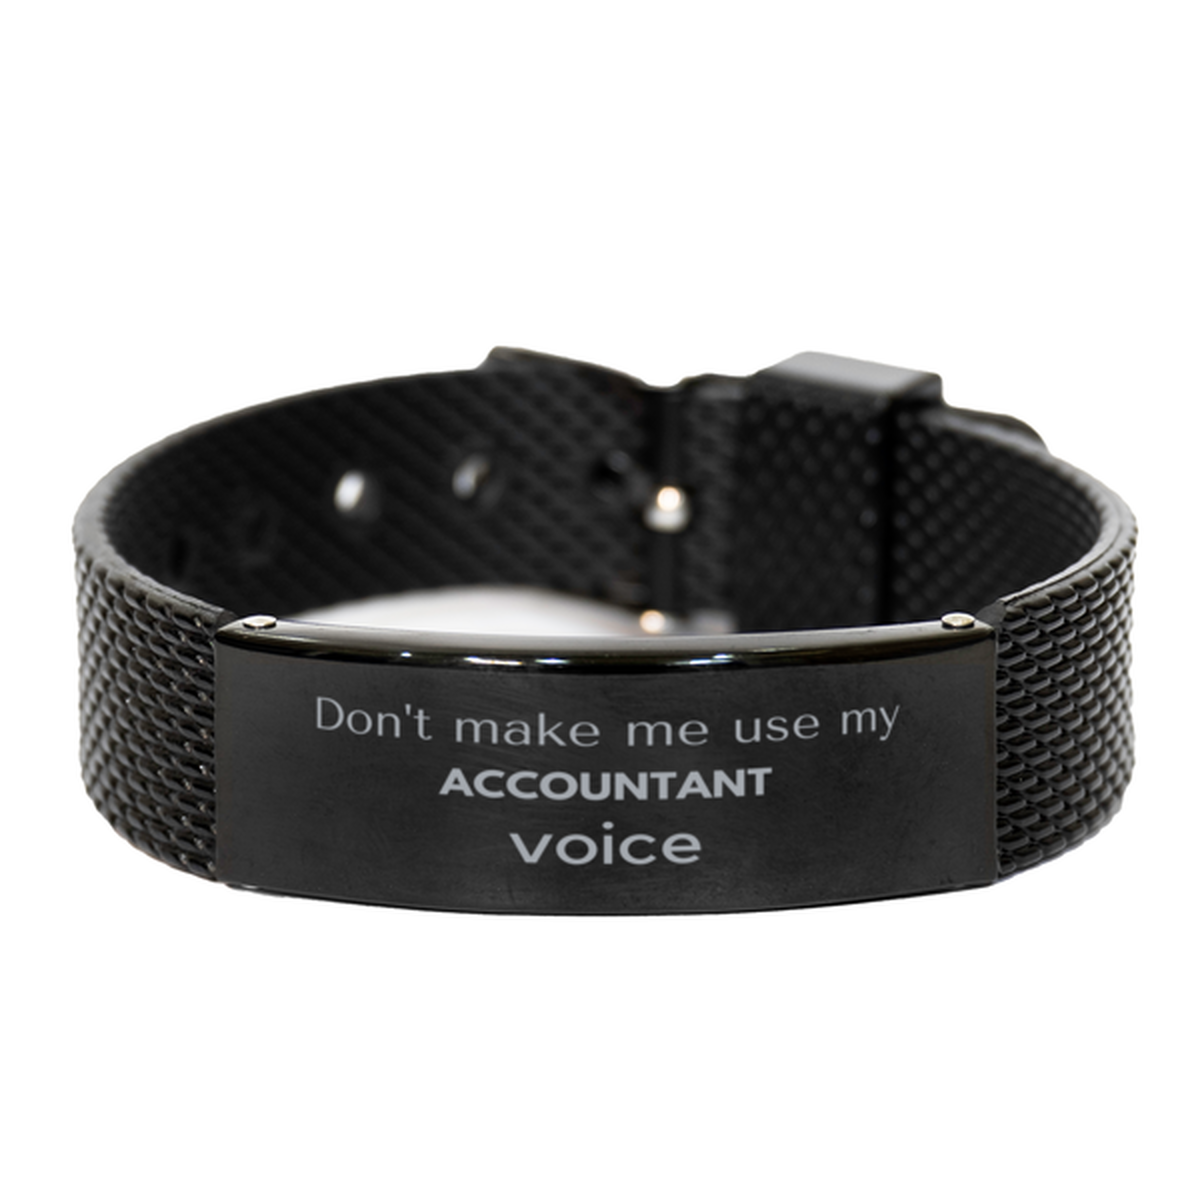 Don't make me use my Accountant voice, Sarcasm Accountant Gifts, Christmas Accountant Black Shark Mesh Bracelet Birthday Unique Gifts For Accountant Coworkers, Men, Women, Colleague, Friends